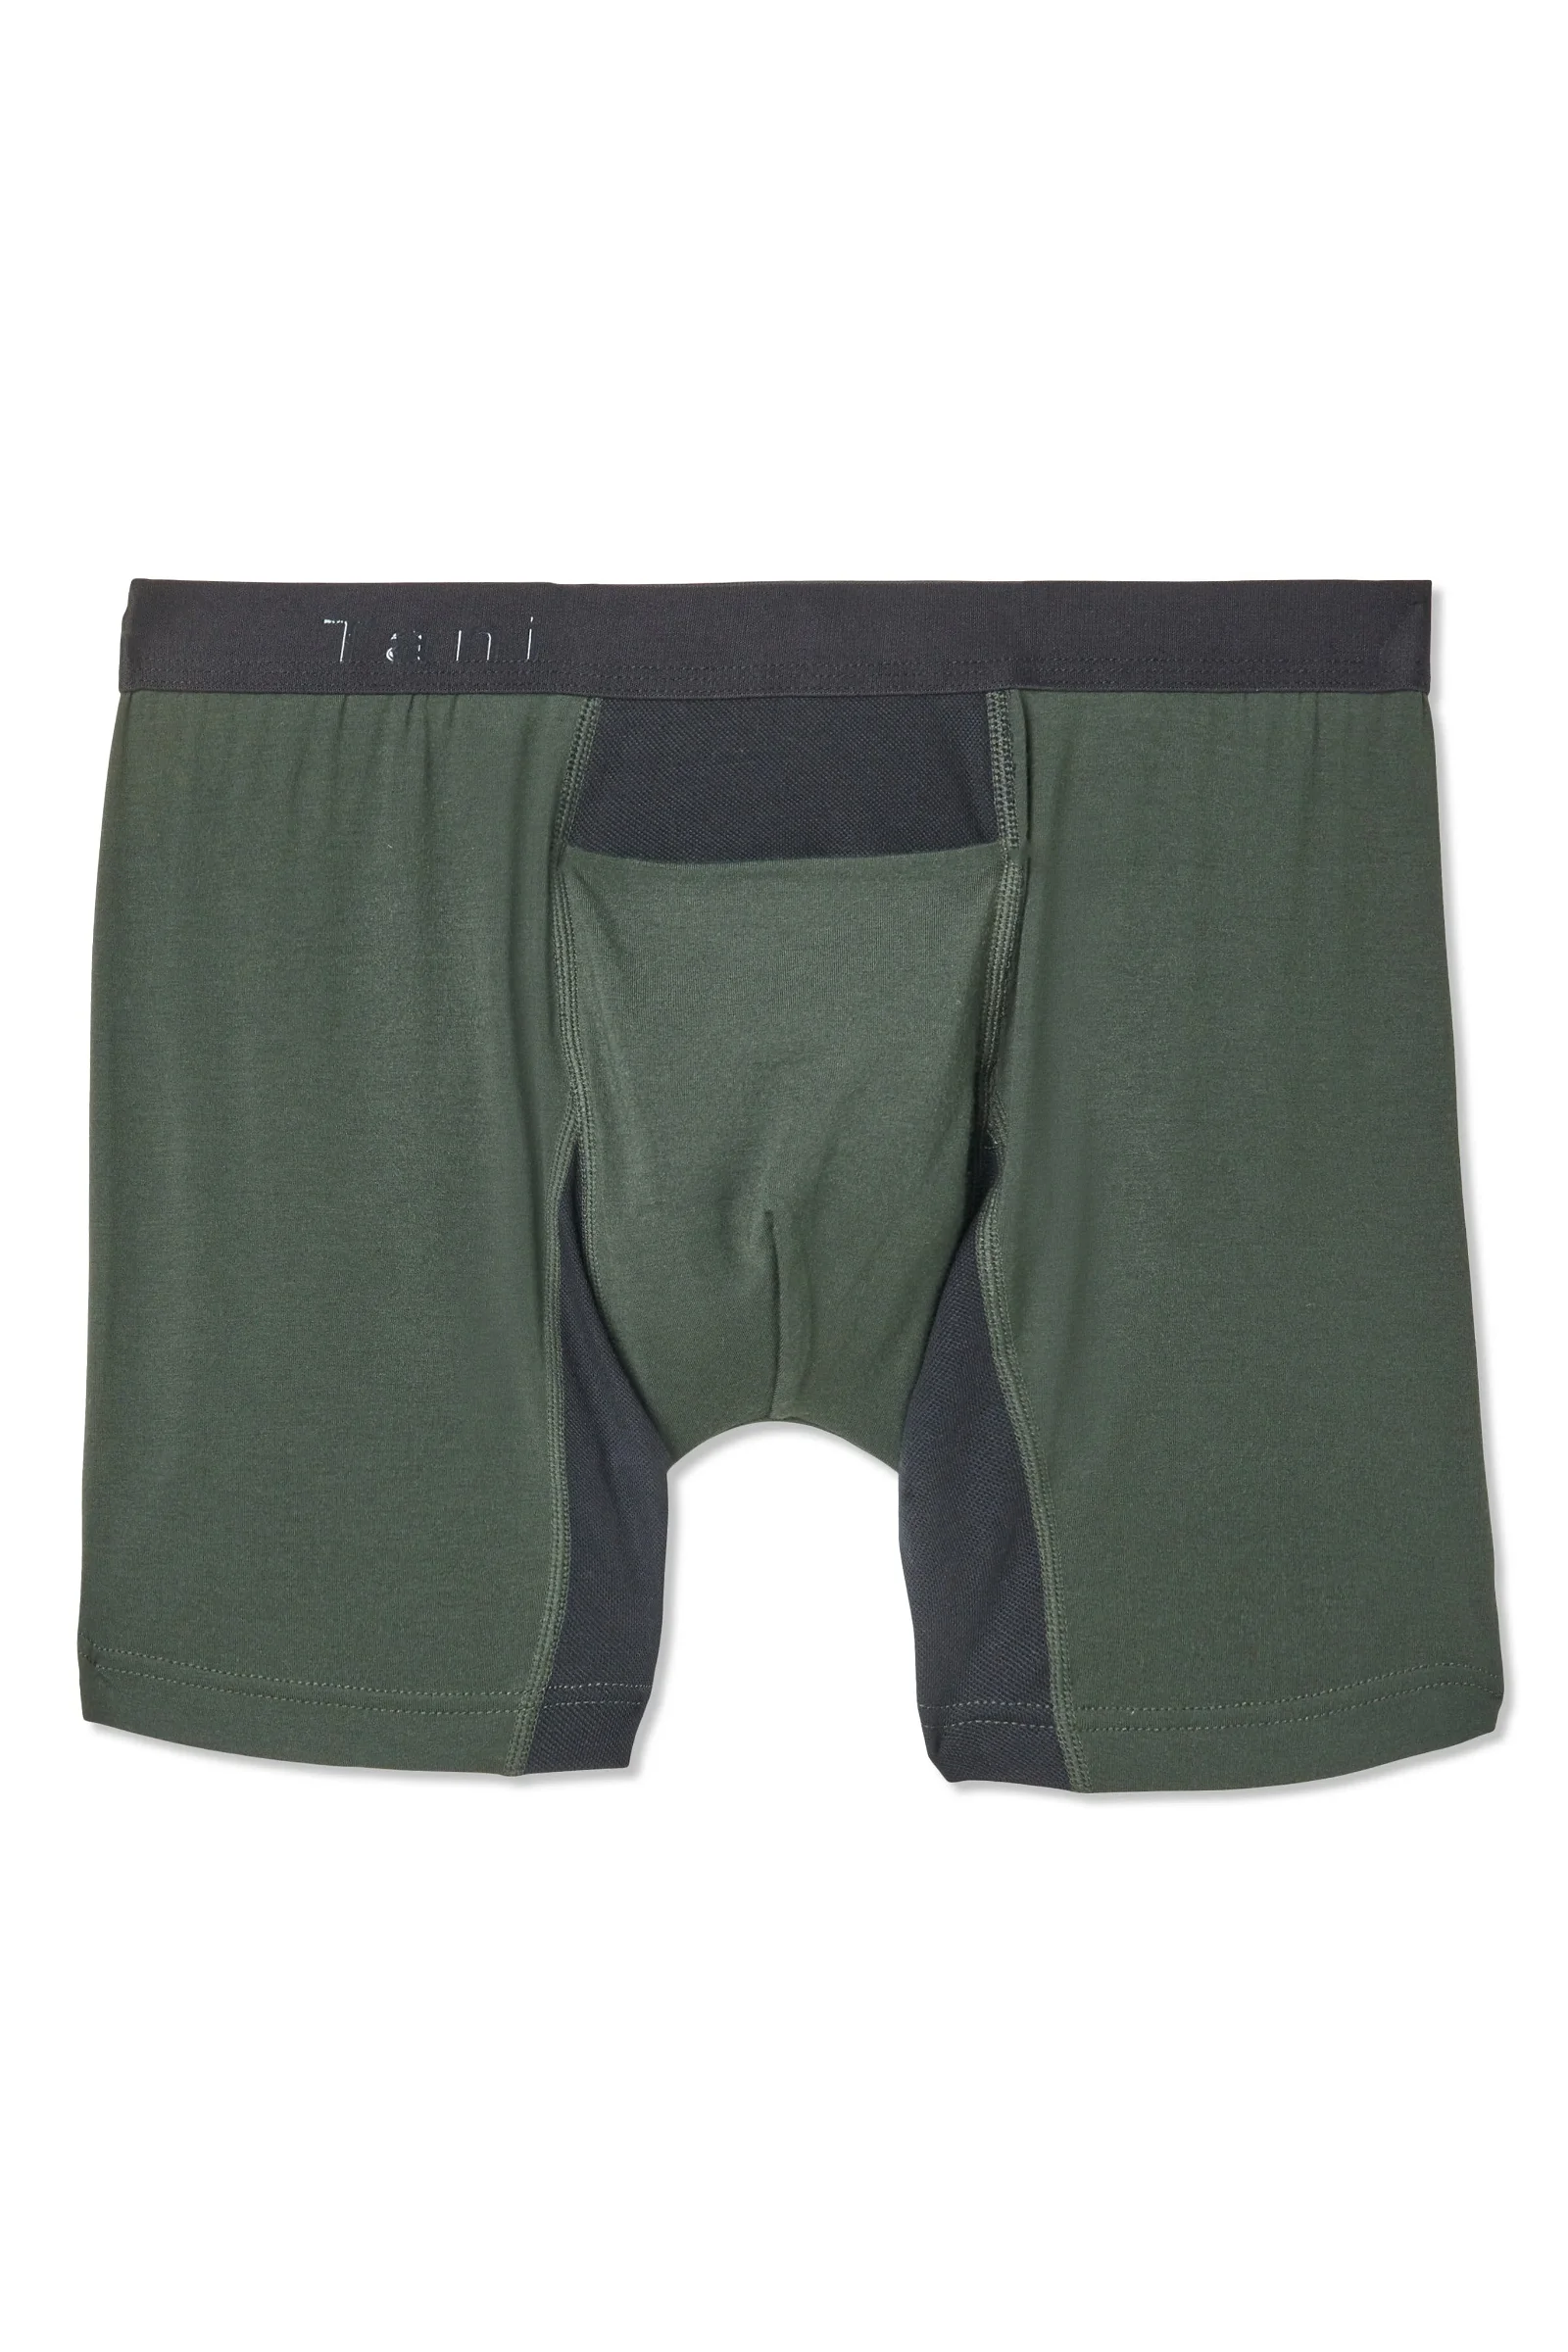 Image of Hybrid Boxer Brief With Horizontal Fly